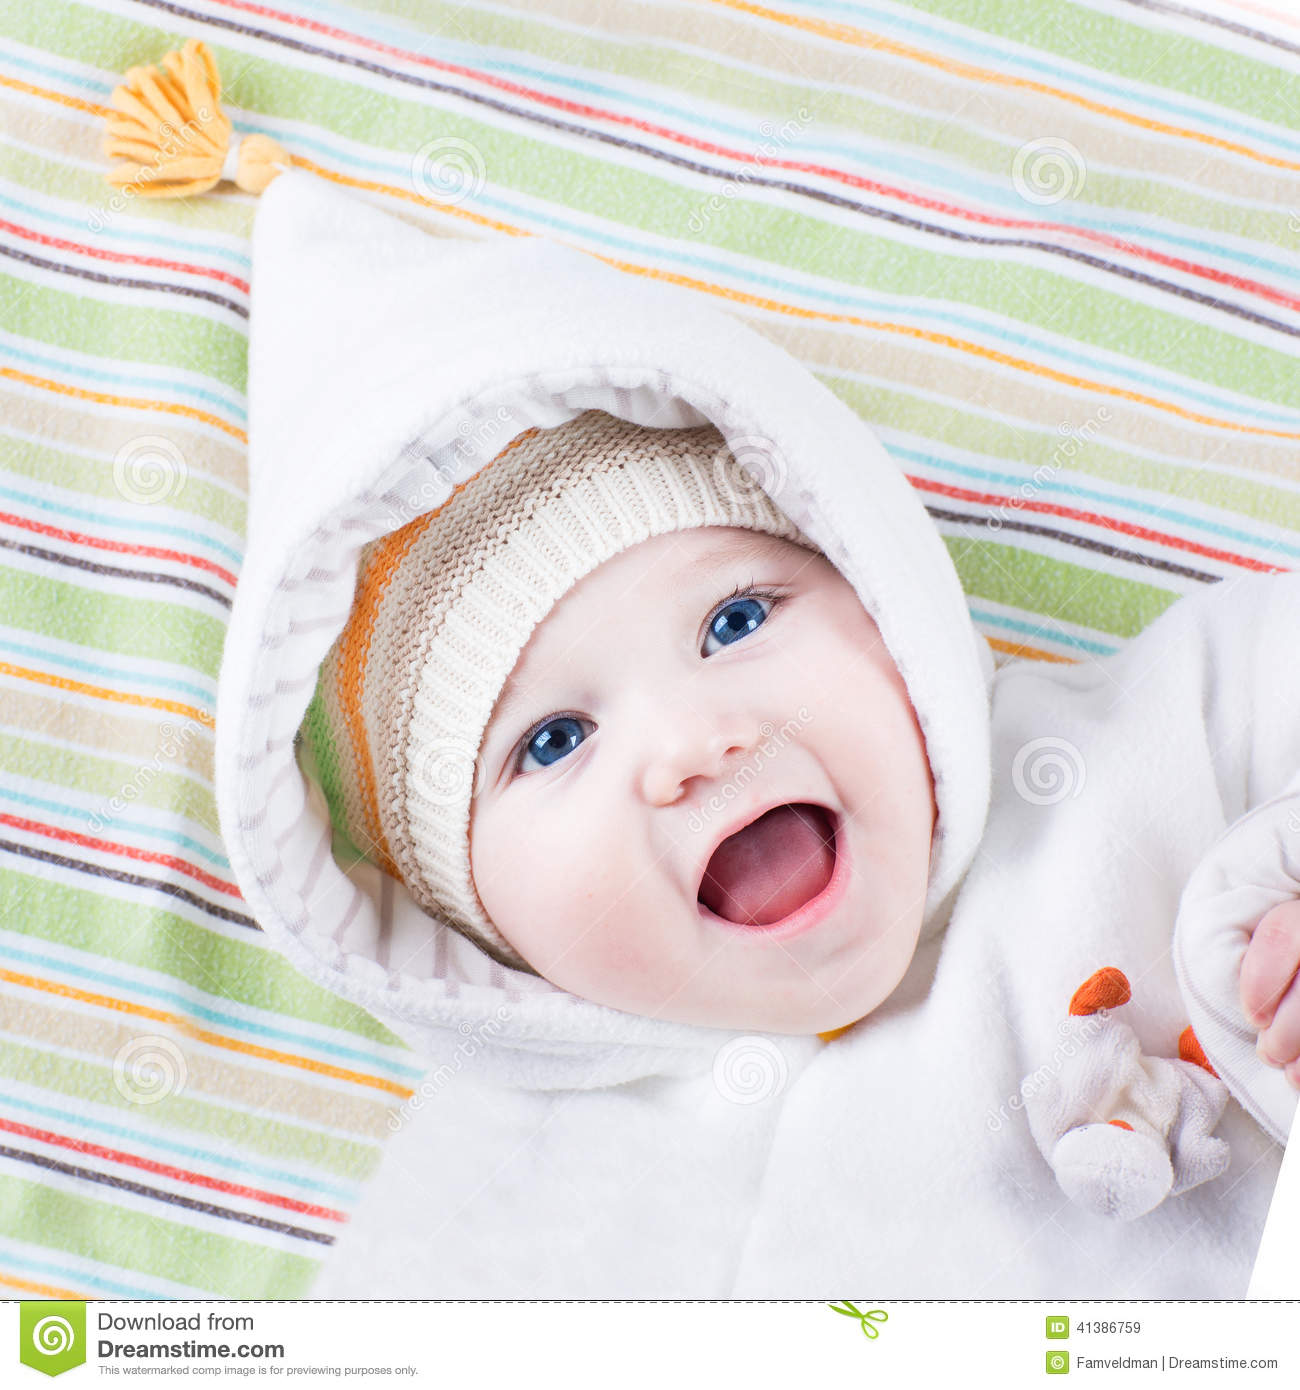     Laughing Baby Girl On Colorful Blanket Stock Photo   Image  41386759